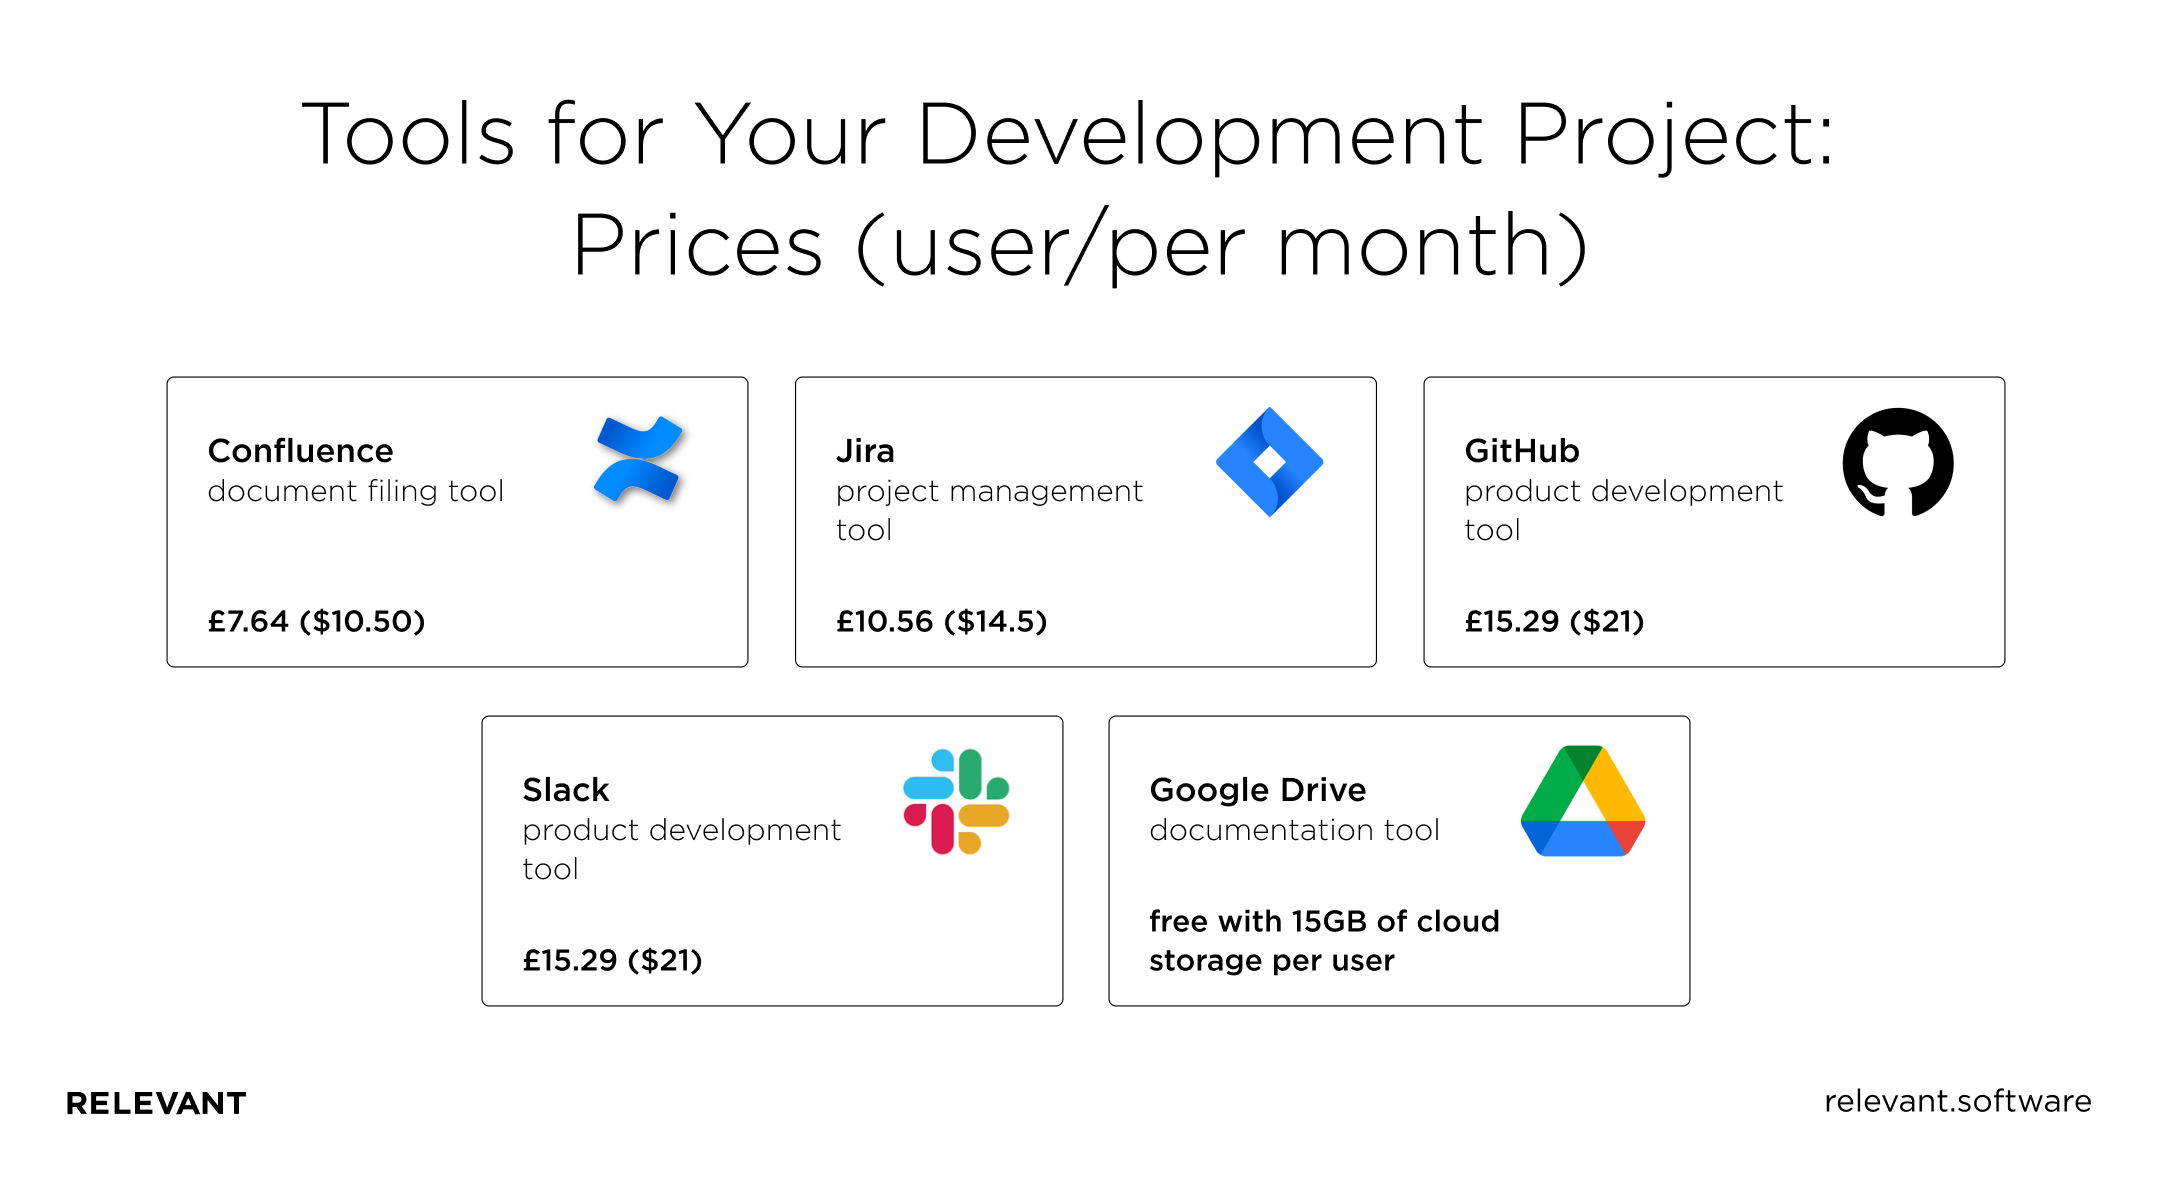 ools for Your Development Project: Prices
(user/per month)